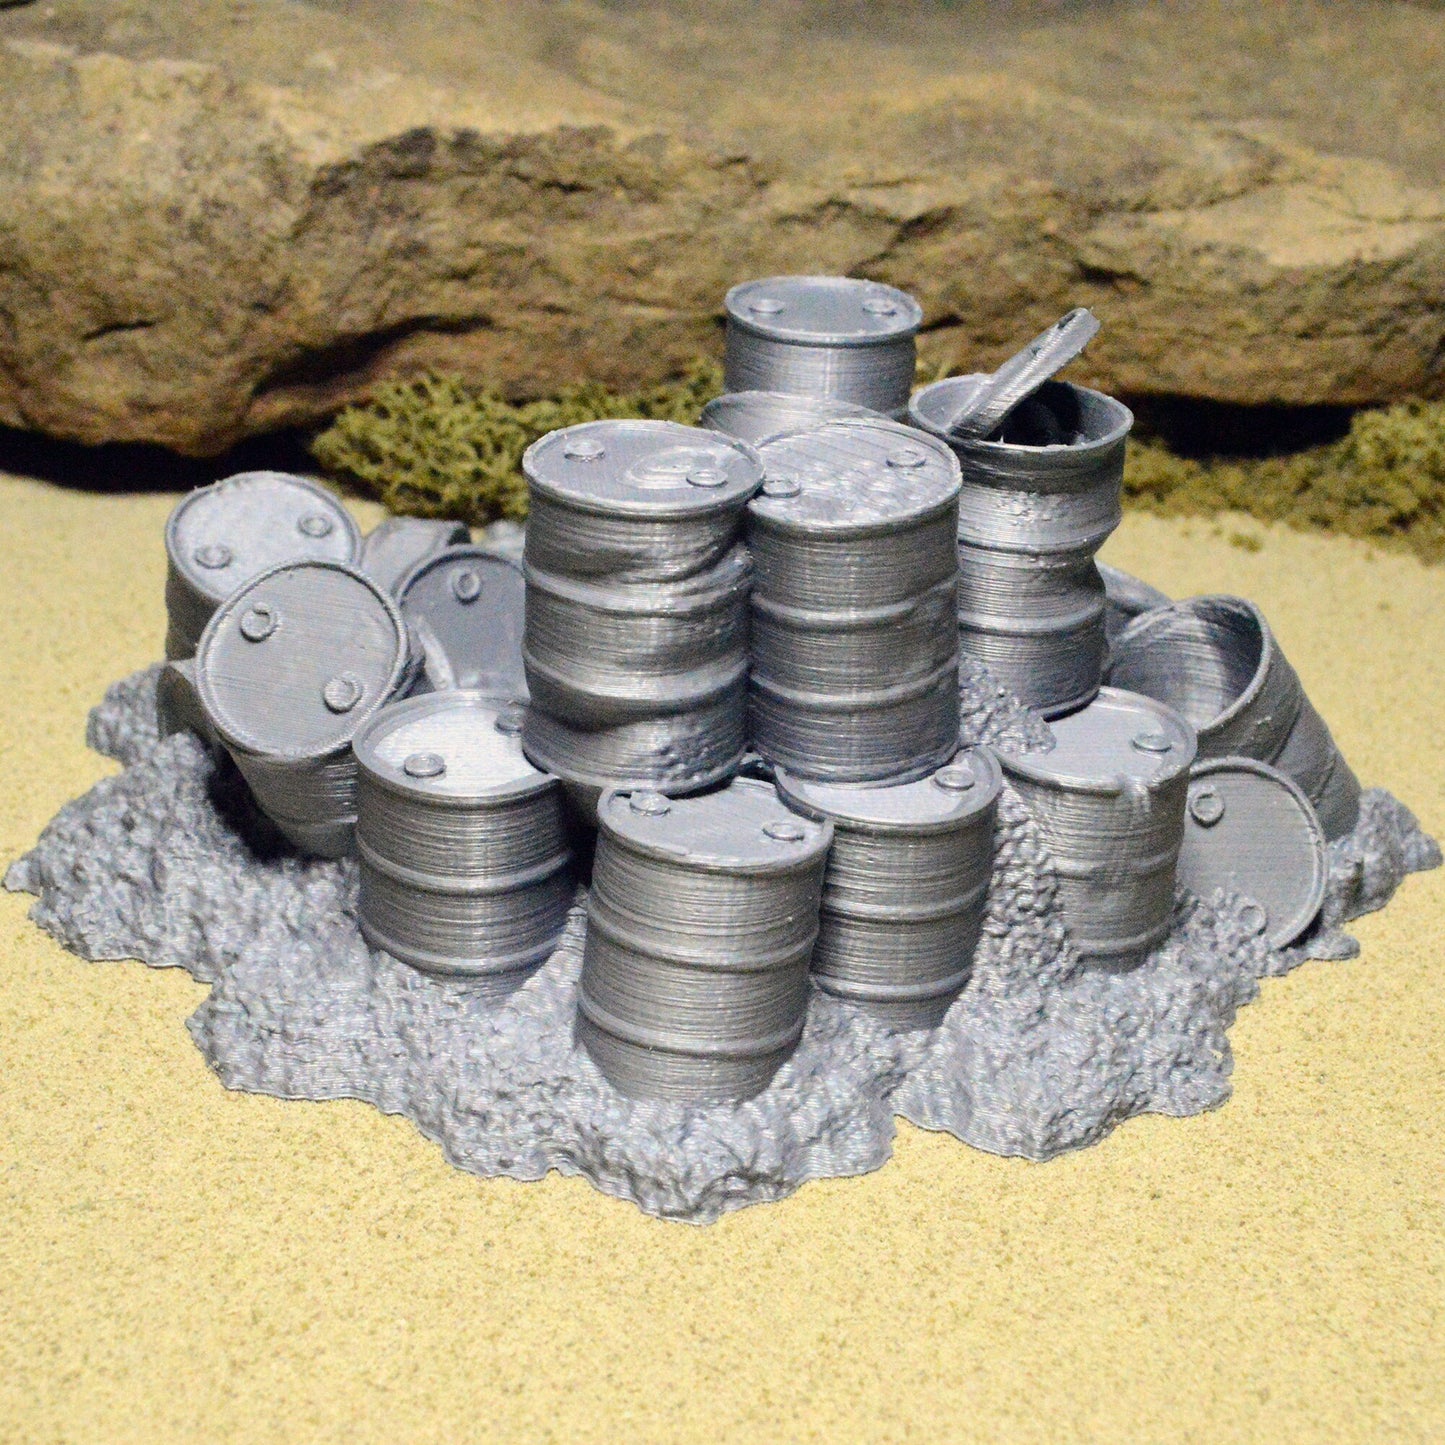 Scrapyard Miniature Barrels 15mm 20mm 28mm 32mm for Gaslands Terrain, Urban Fallout Wasteland Post-Apocalyptic, This is Not a Test